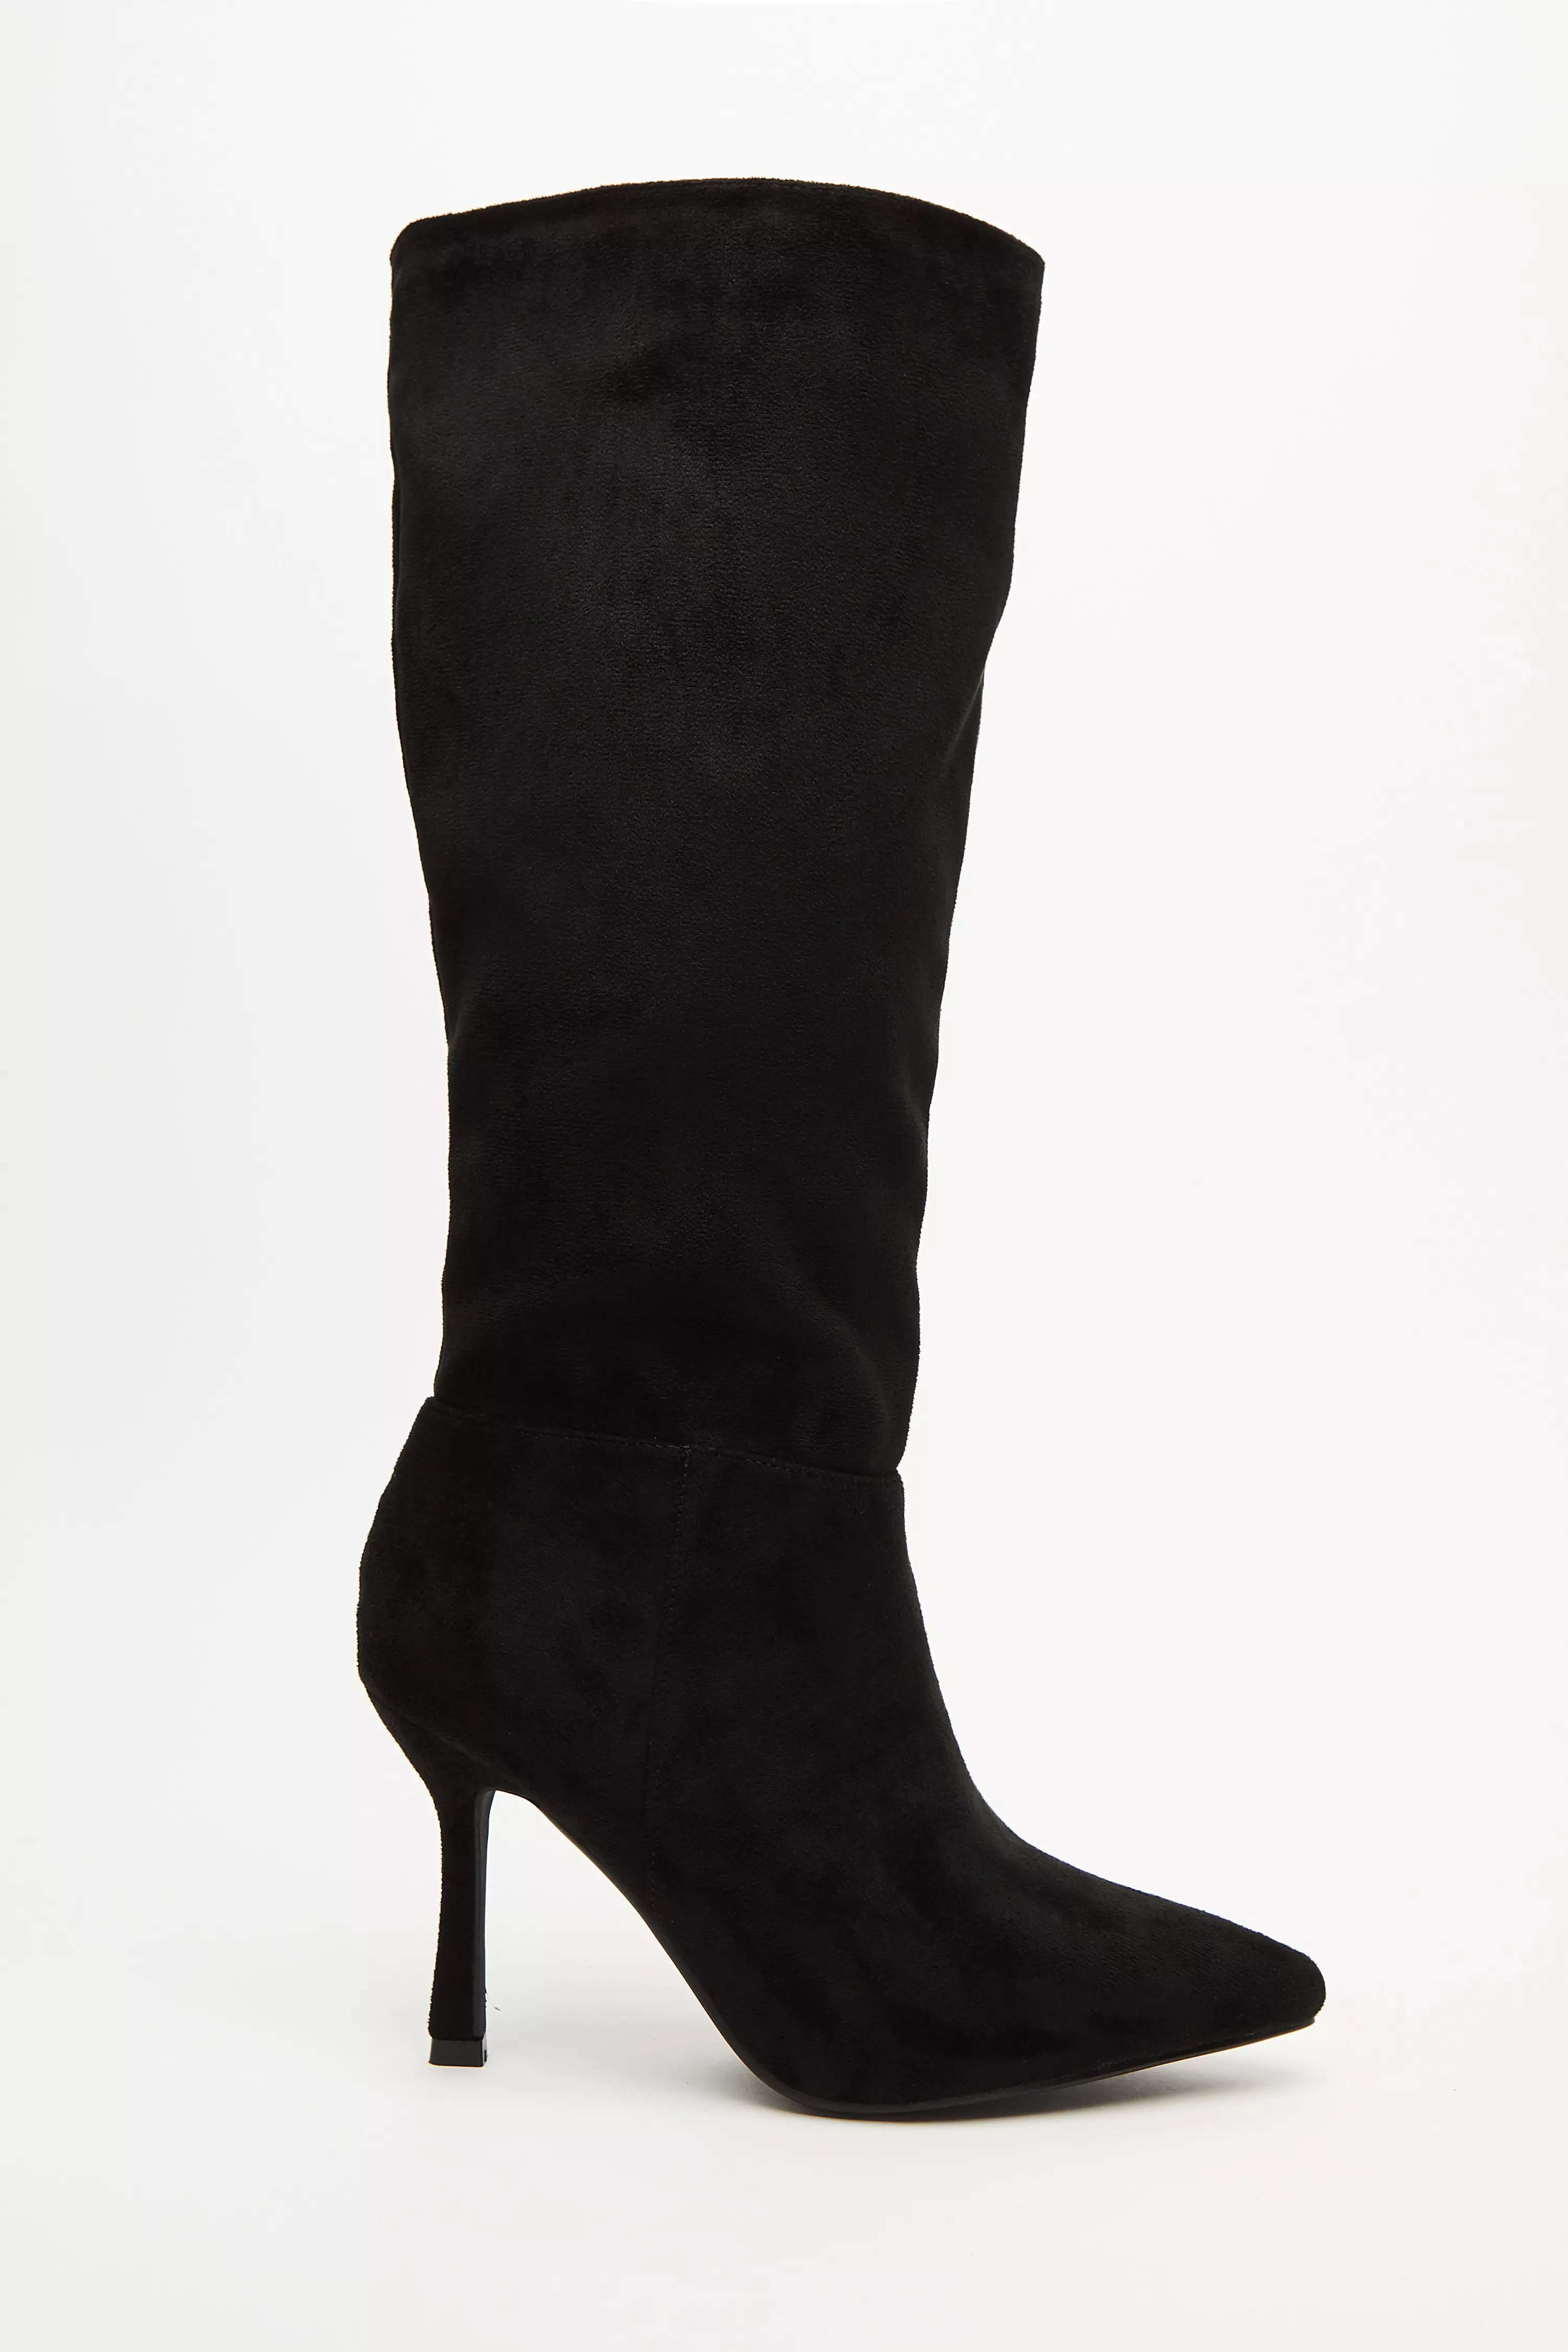 Black Faux Suede Knee High Heeled Boots